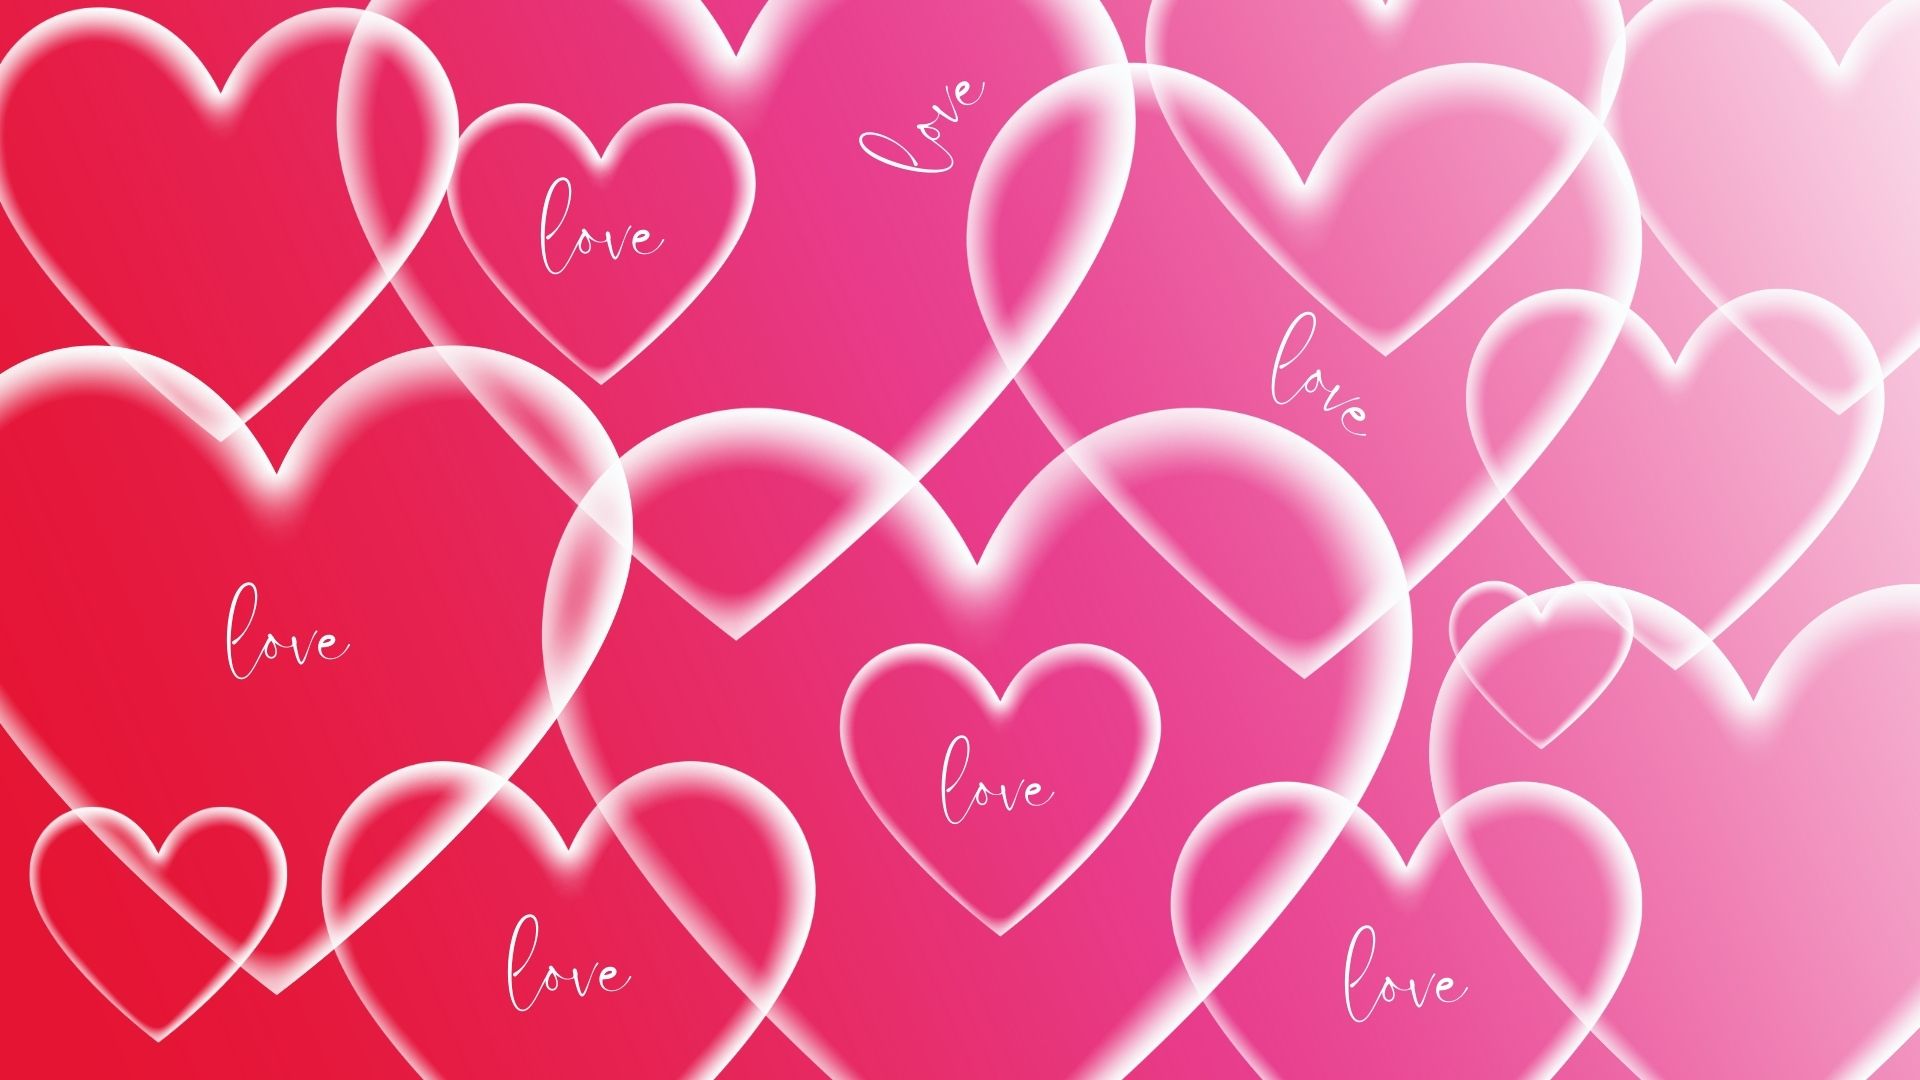 Love Hearts Background Images (7)